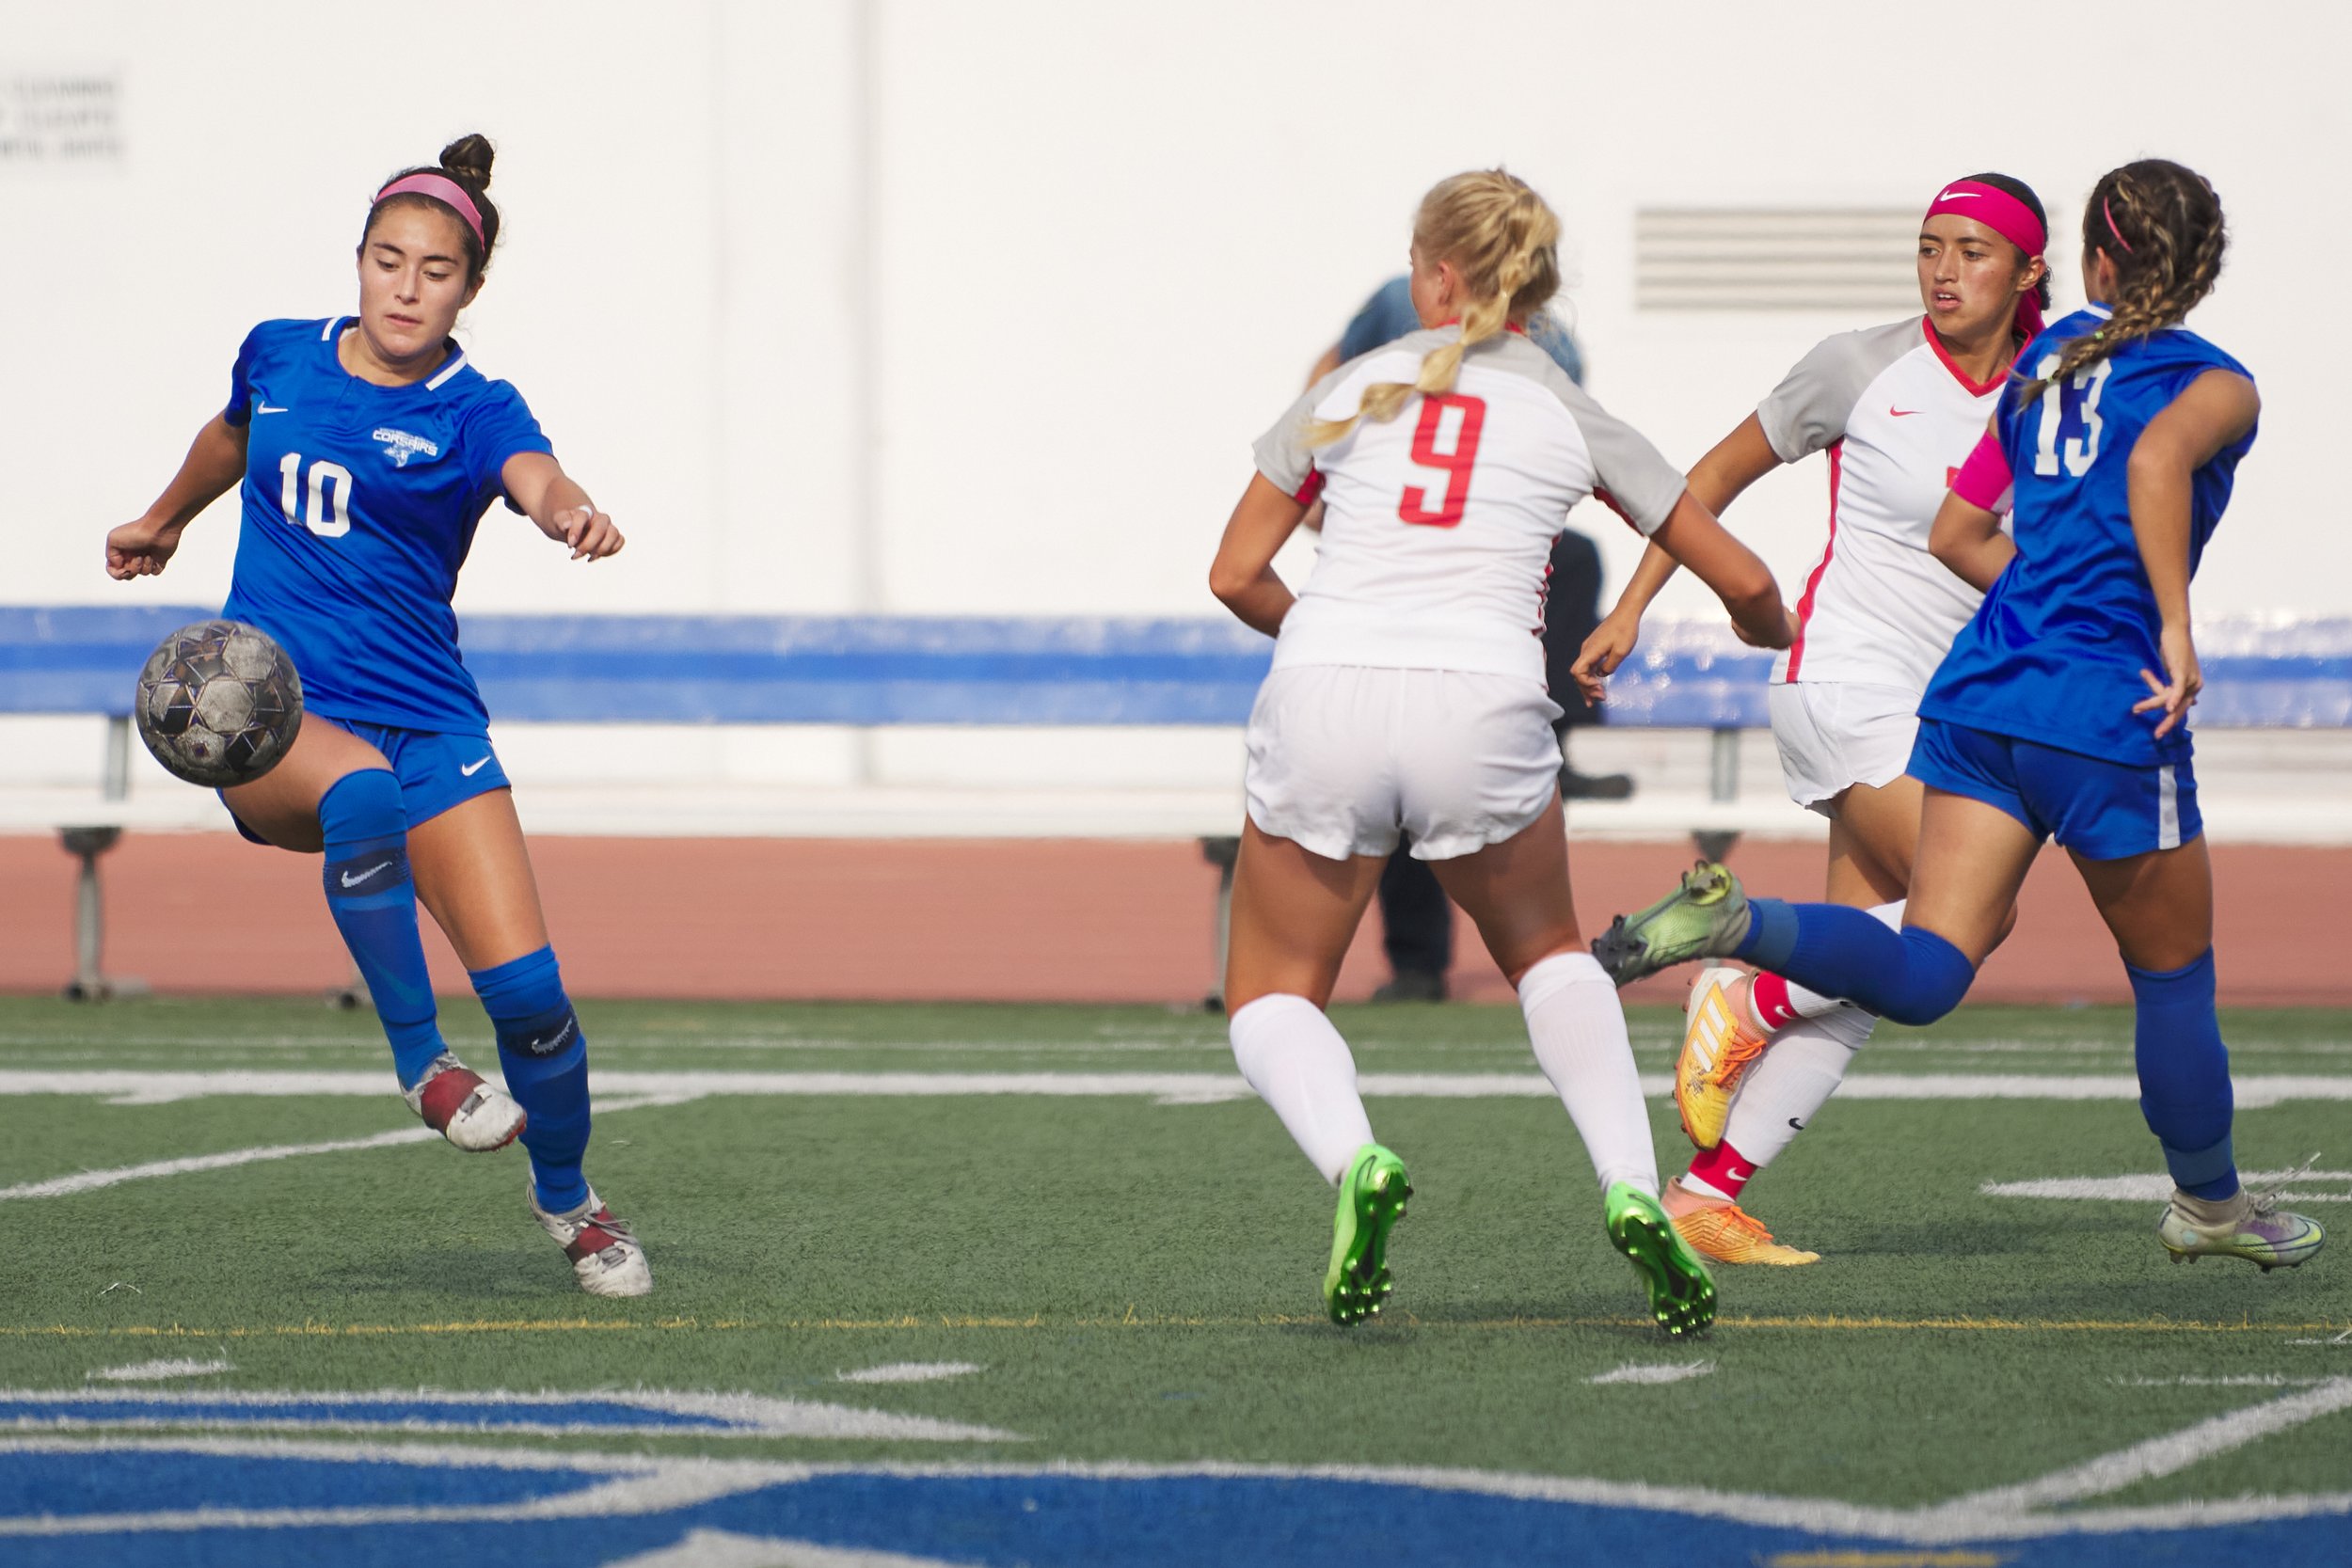  Santa Monica College Corsairs' Ali Alban and Sophie Doumitt (right), and Bakersfield College Renegades' Halle Knox (9) and Olga Amador (center right) during the women's soccer match on Friday, Oct. 20, 2022, at Corsair Field in Santa Monica, Calif. 